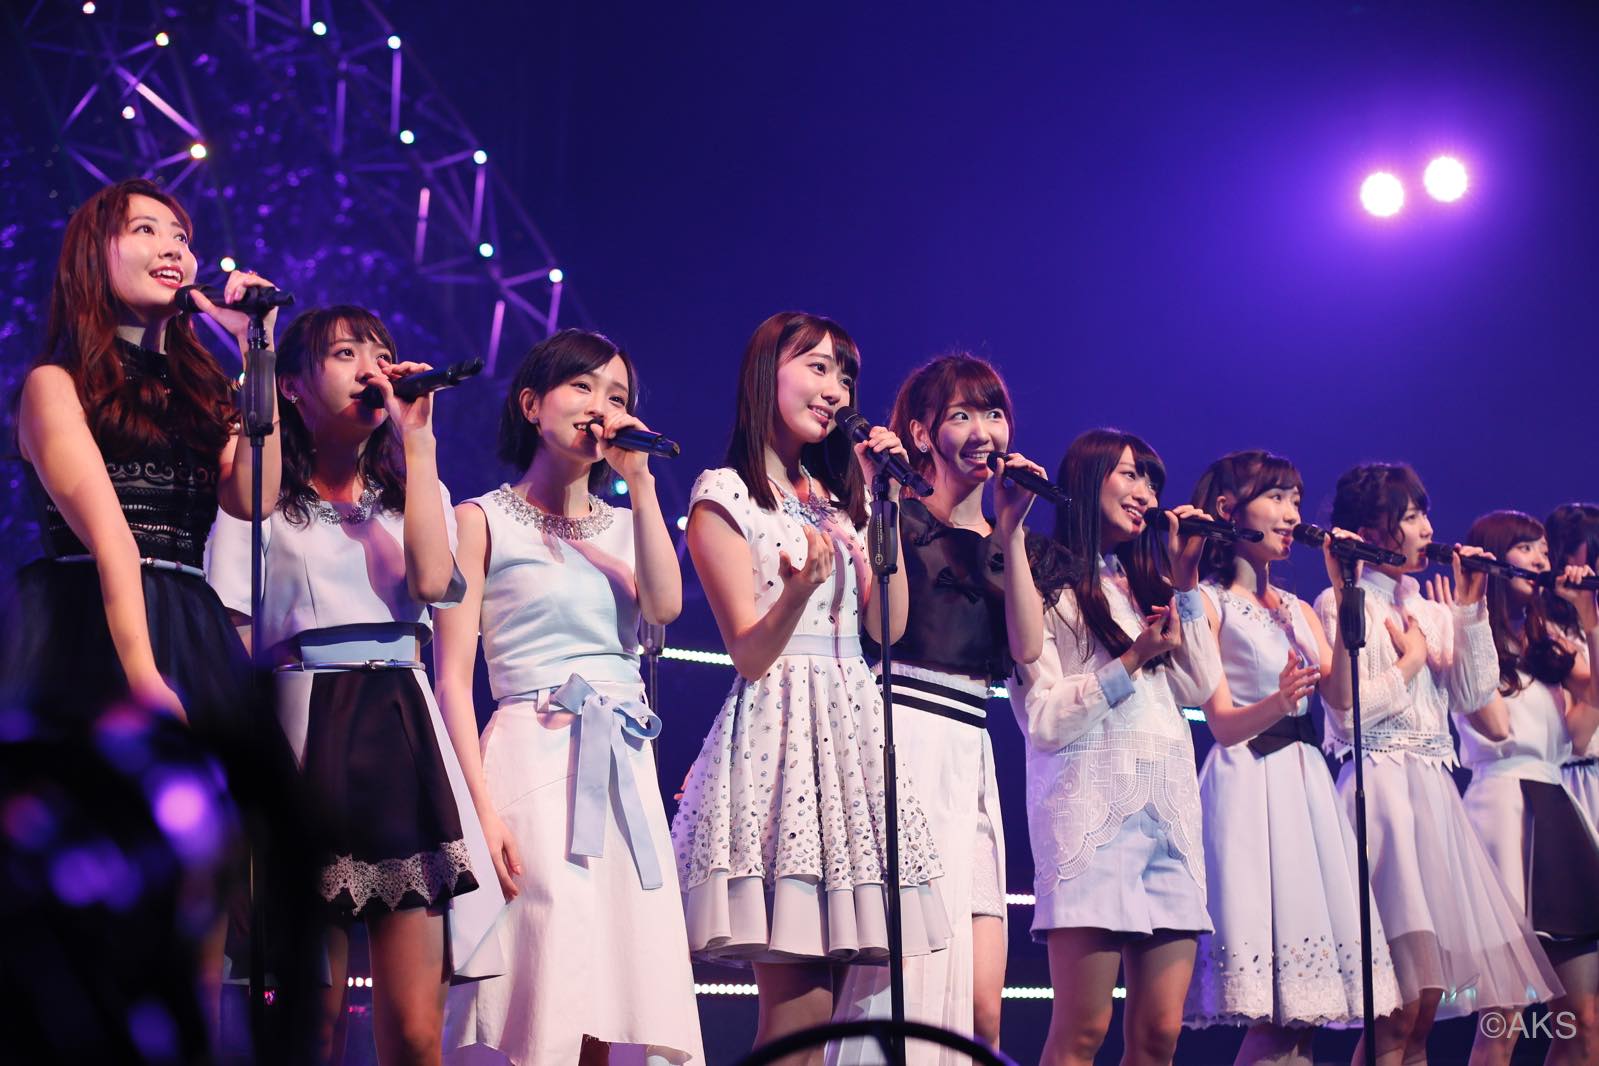 AKB48’s 43rd Single “Kimi wa Melody” Revealed on Final Day of Request Hour 2016!